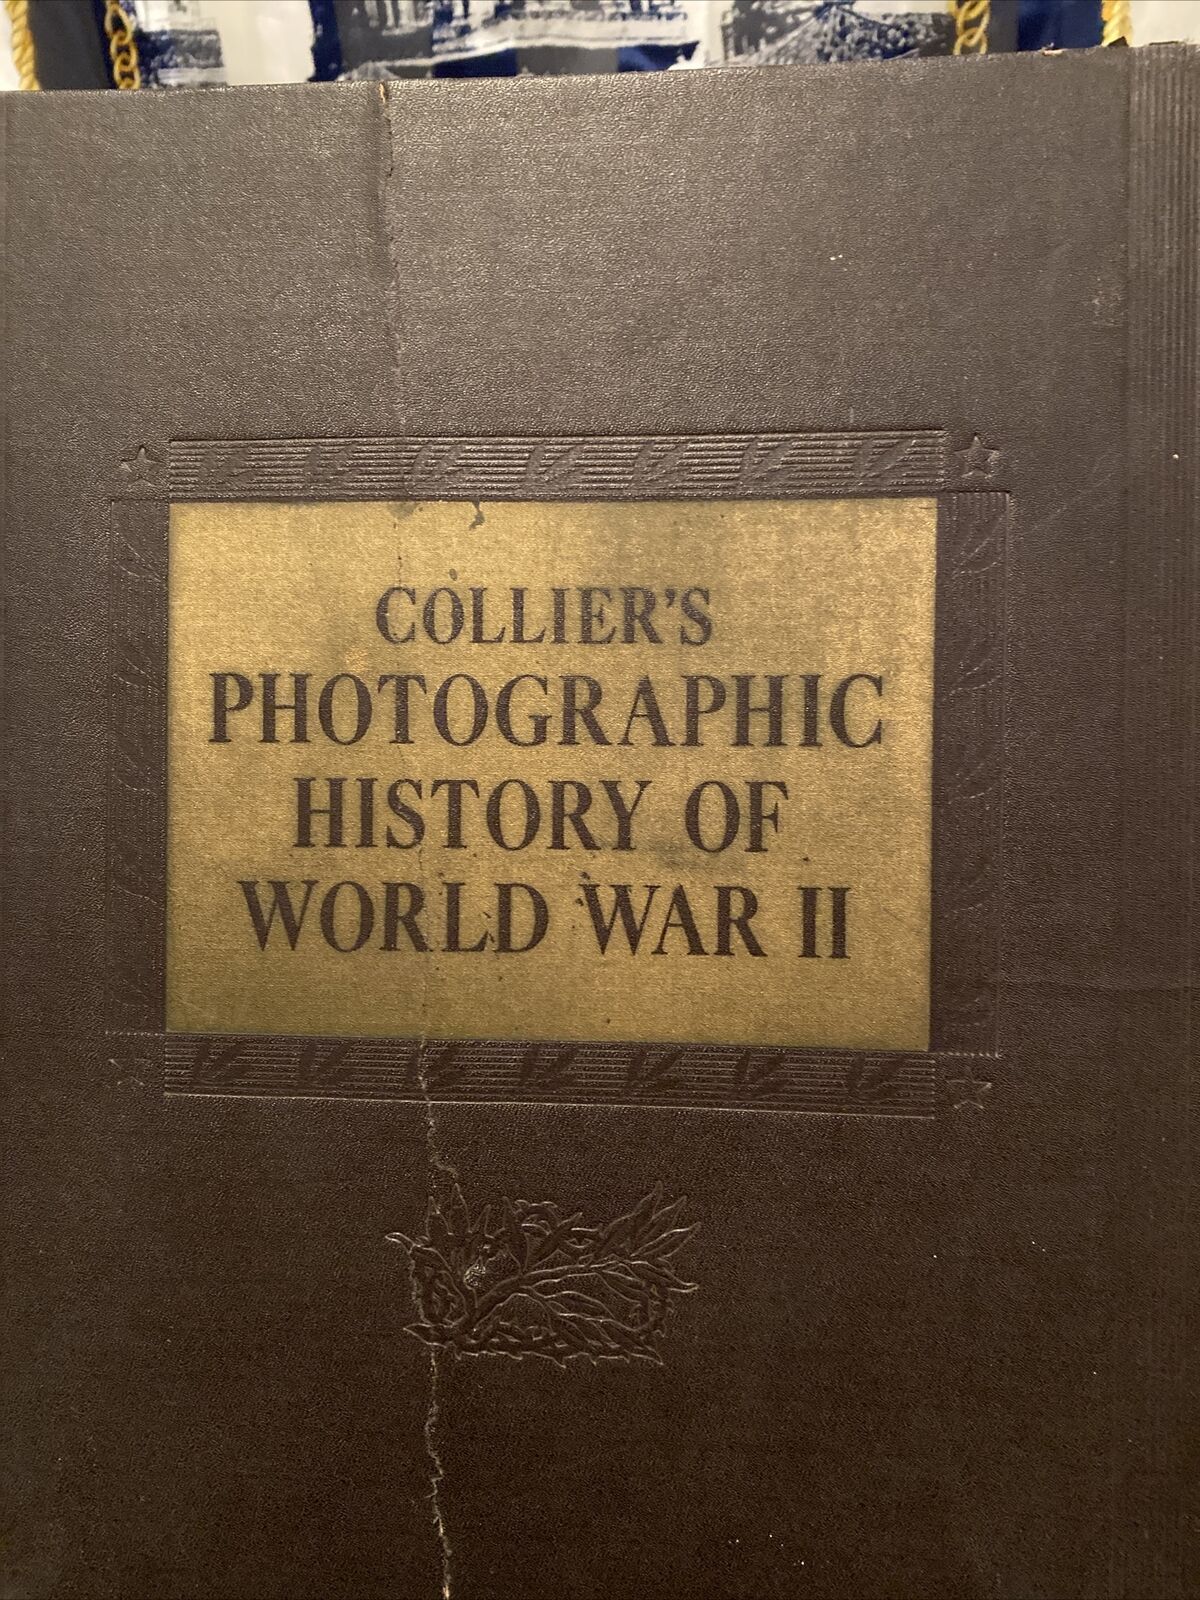 Collier's photographic history of world war ii